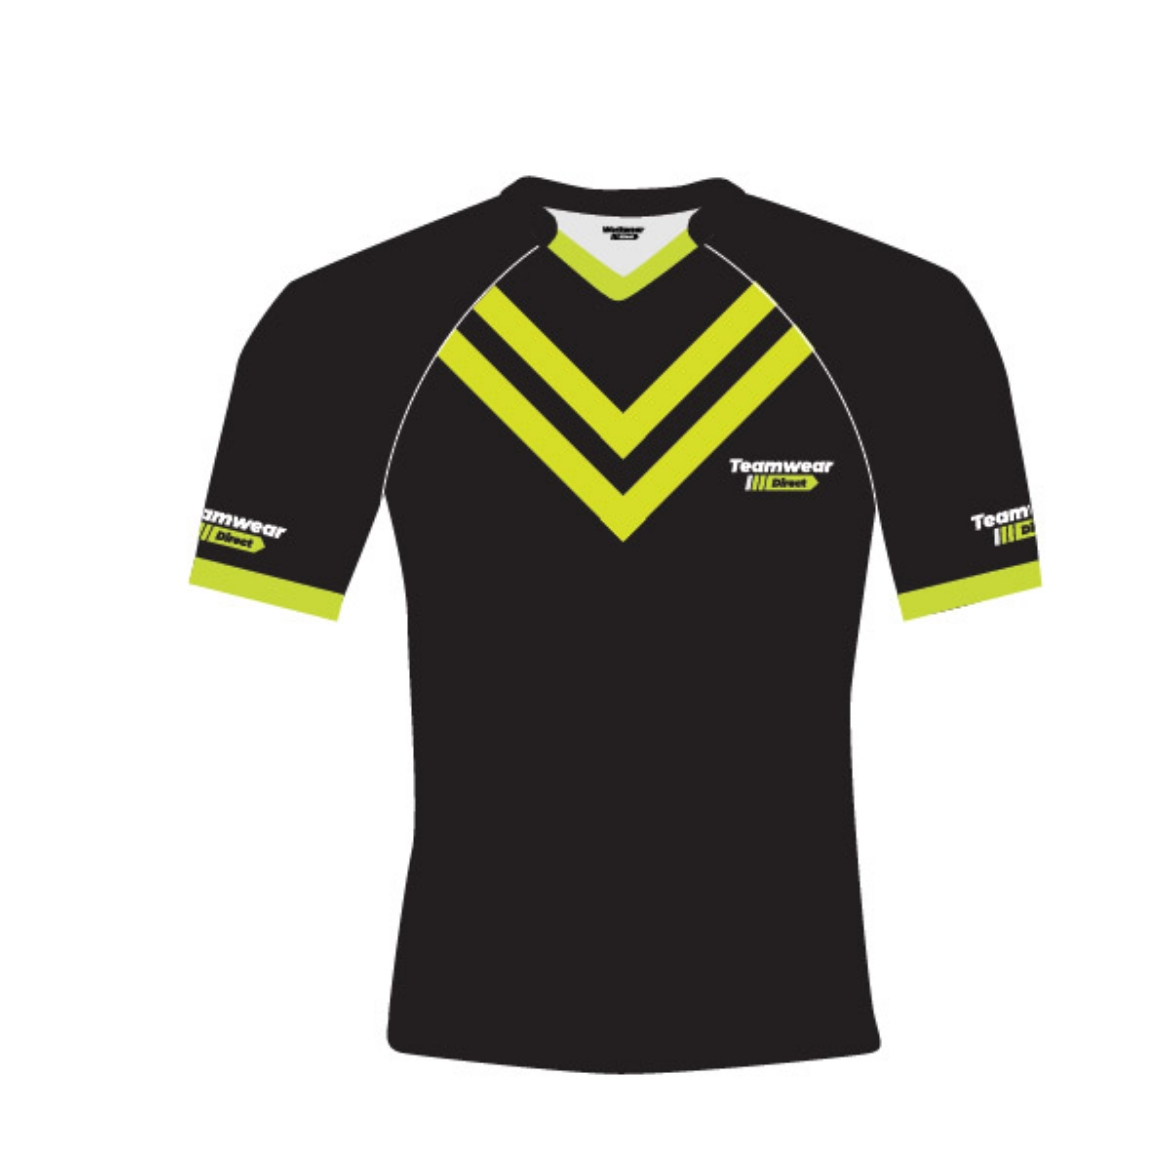 Picture of Teamwear Direct Rugby League Jersey